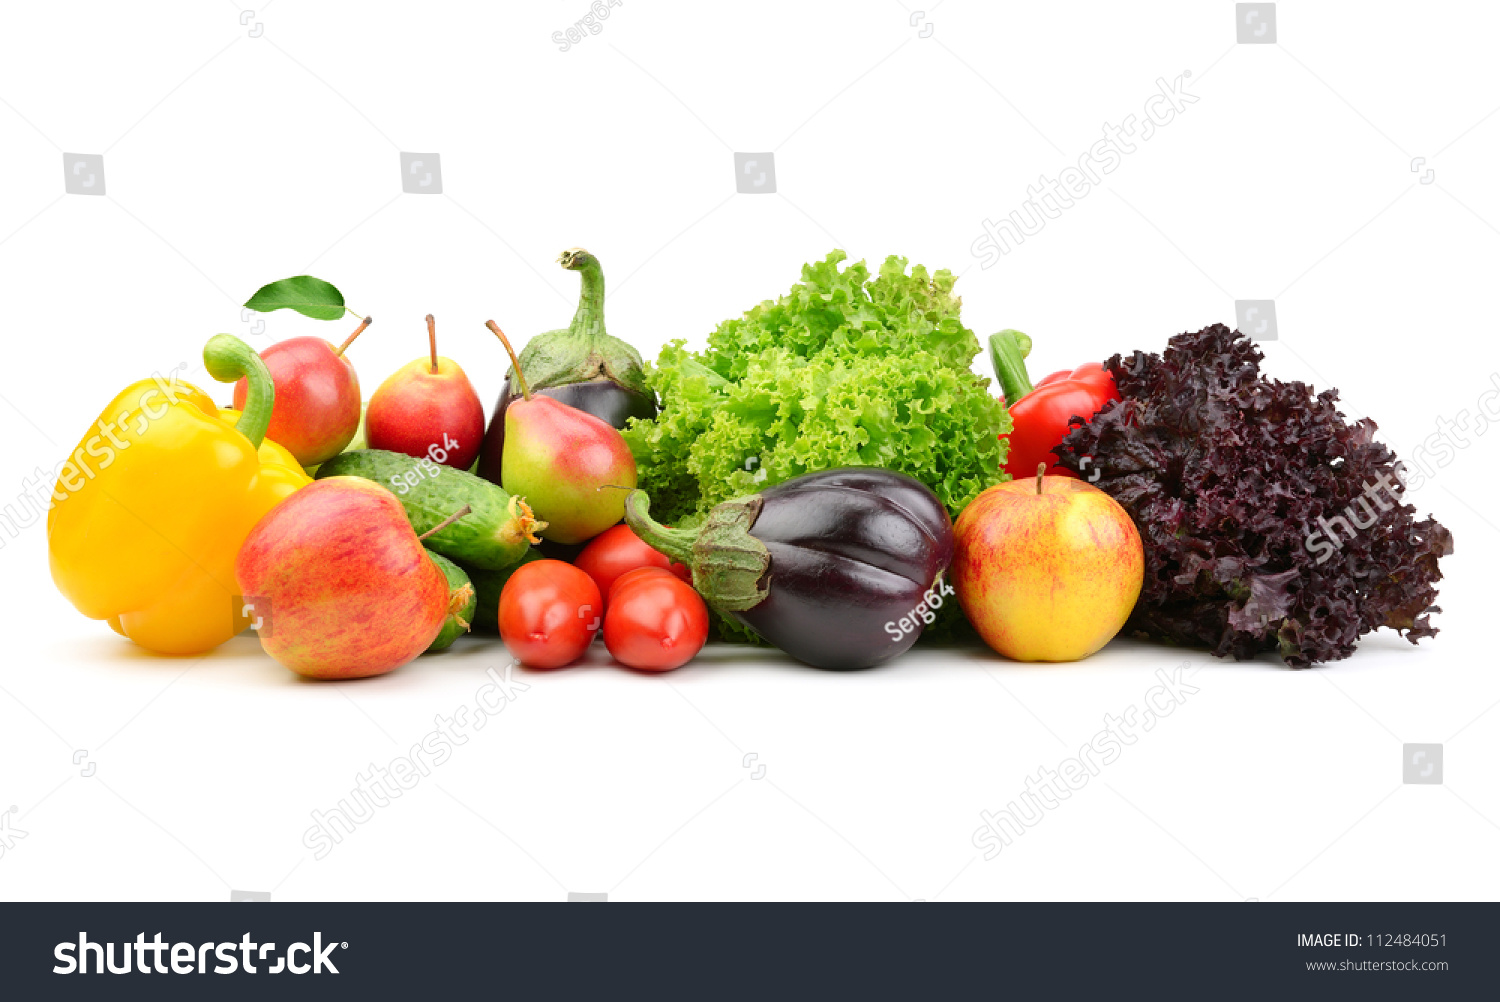 collection fruits and vegetables isolated on a white background #112484051